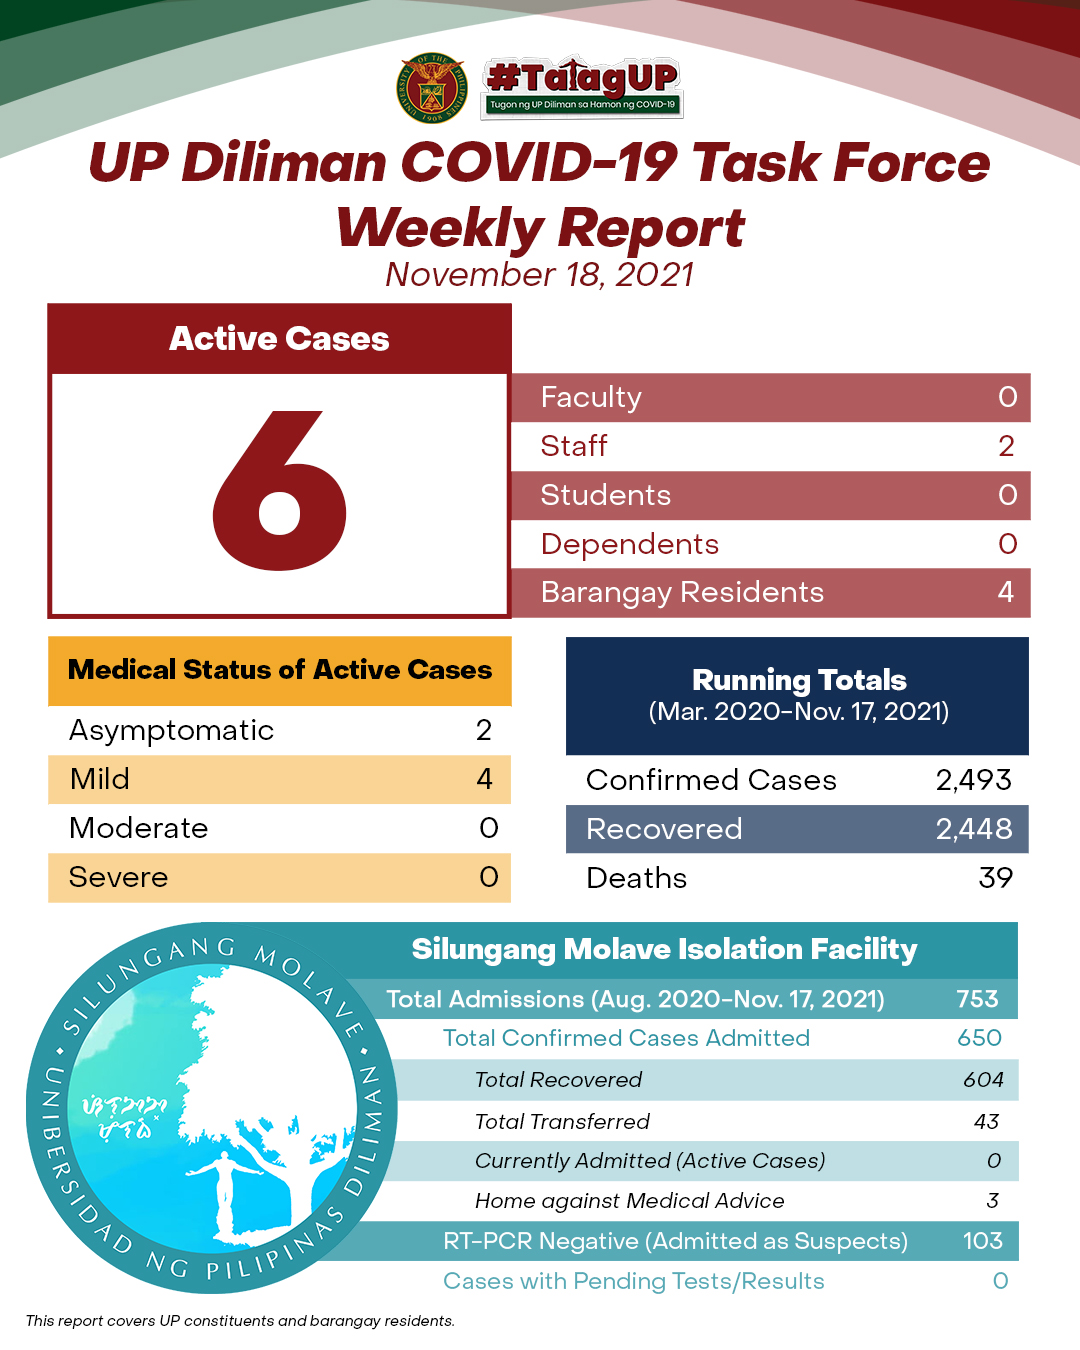 UP Diliman COVID-19 Task Force Weekly Report (November 18, 2021)